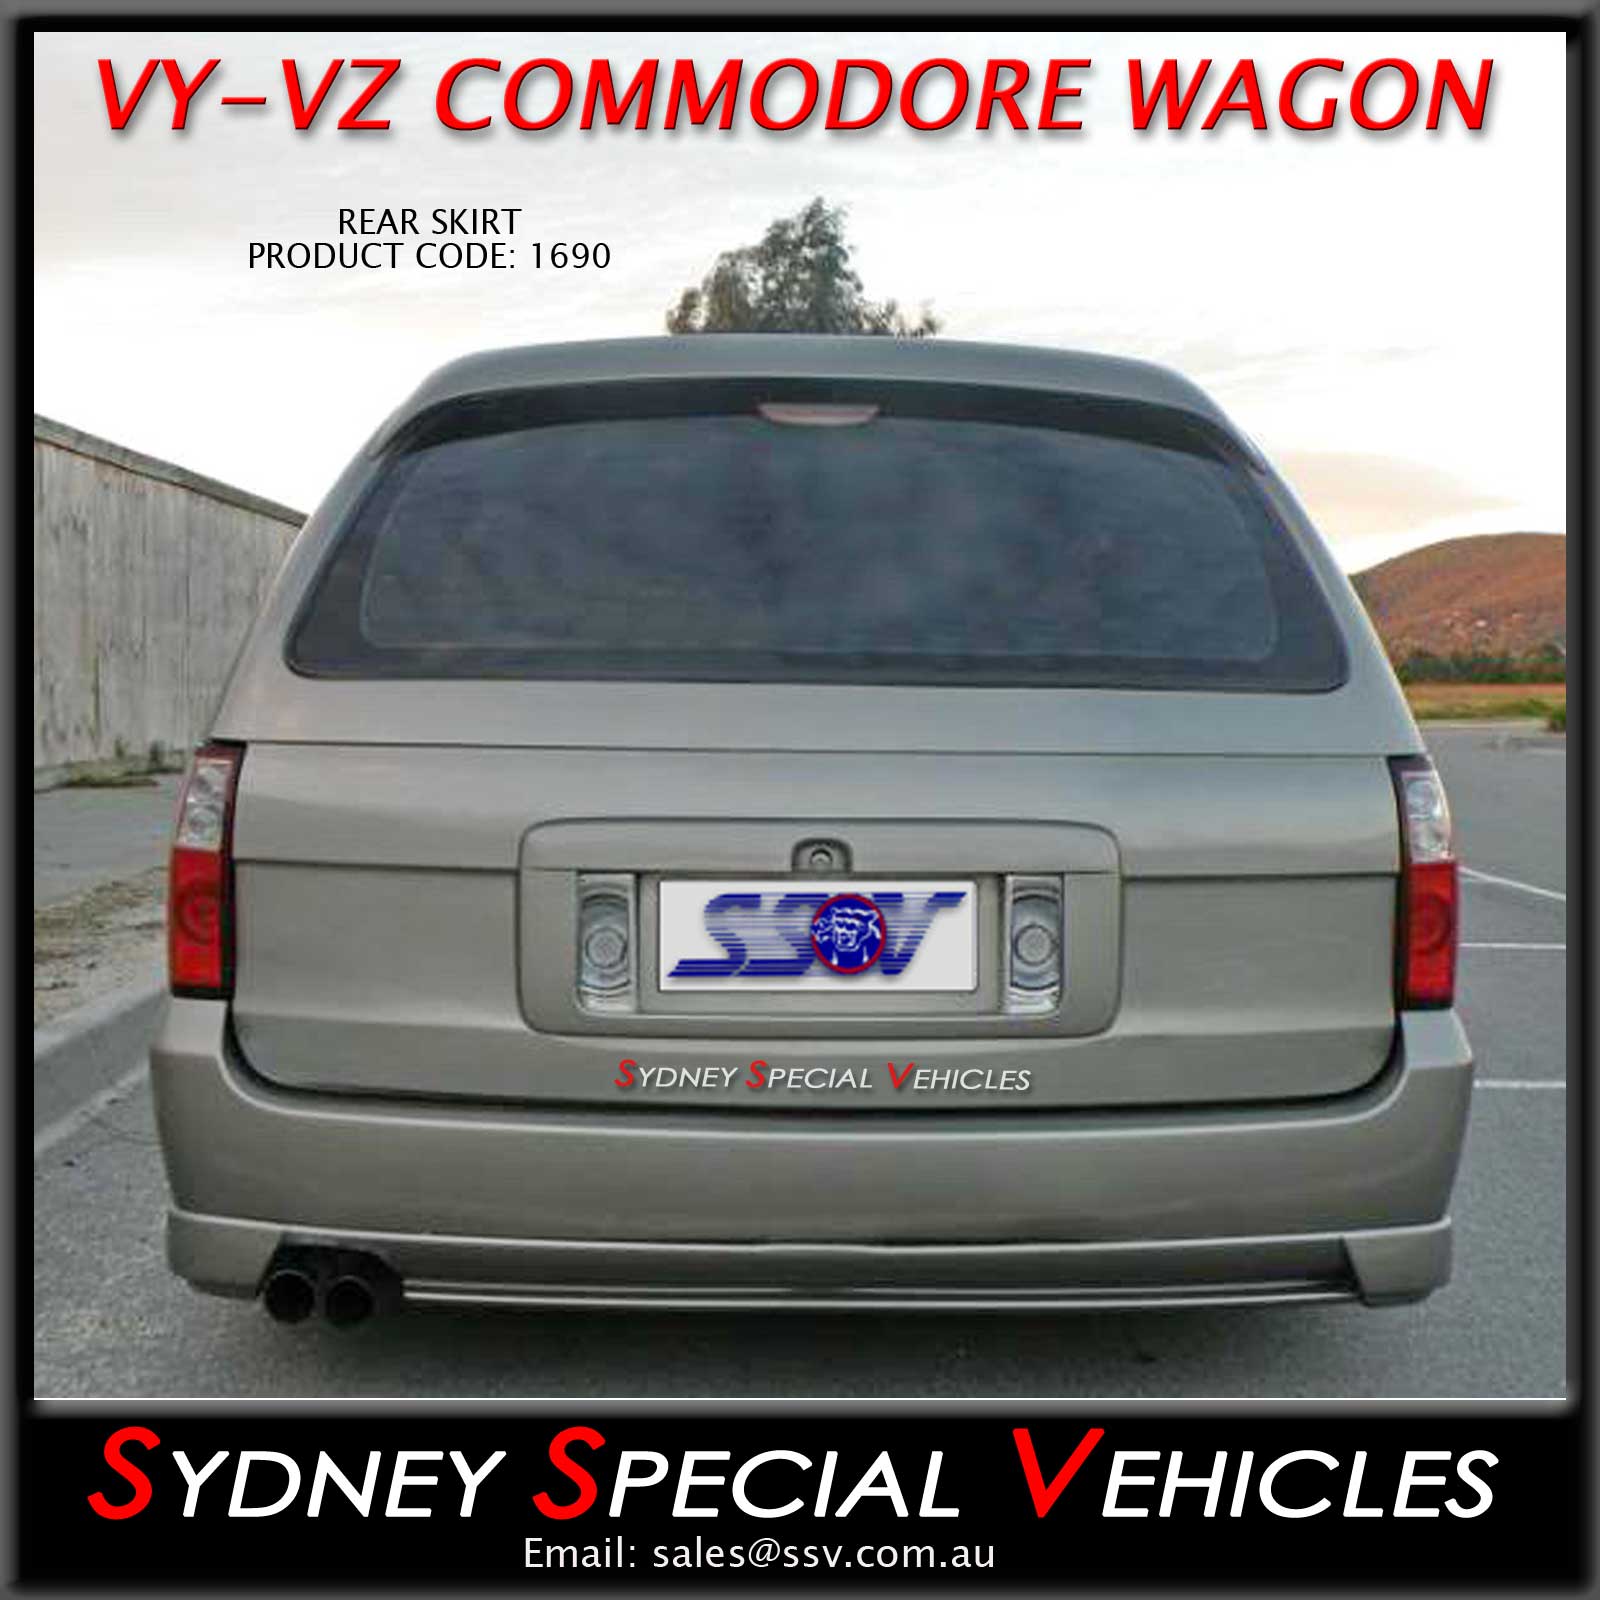 Vy ss wagon